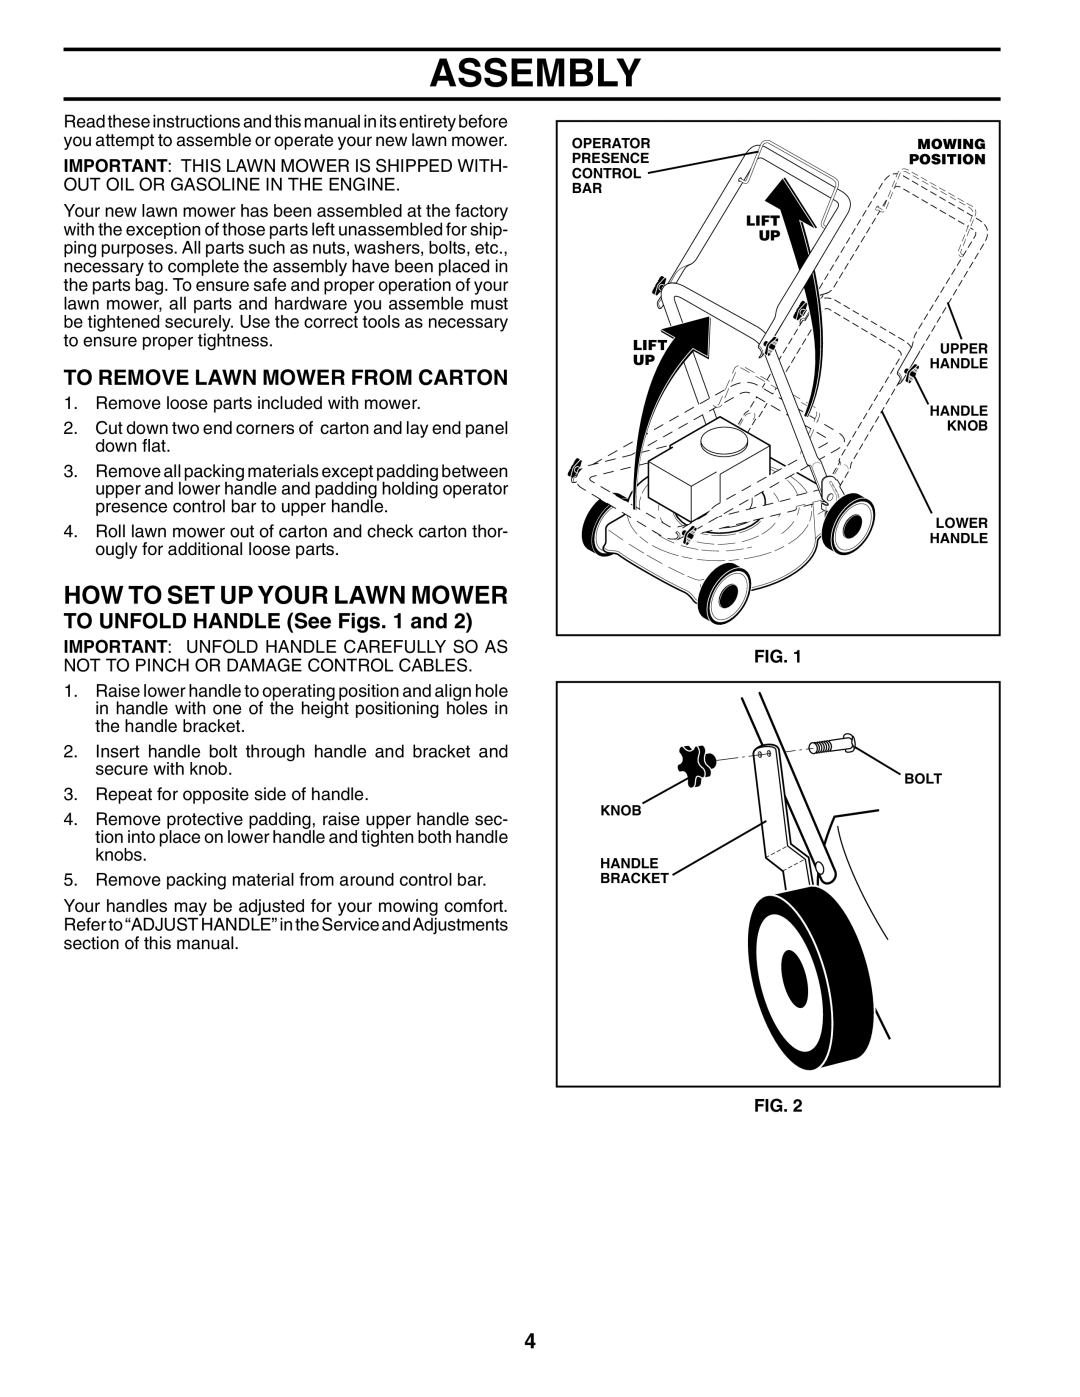 Husqvarna 70R21HV owner manual Assembly, How To Set Up Your Lawn Mower, To Remove Lawn Mower From Carton 